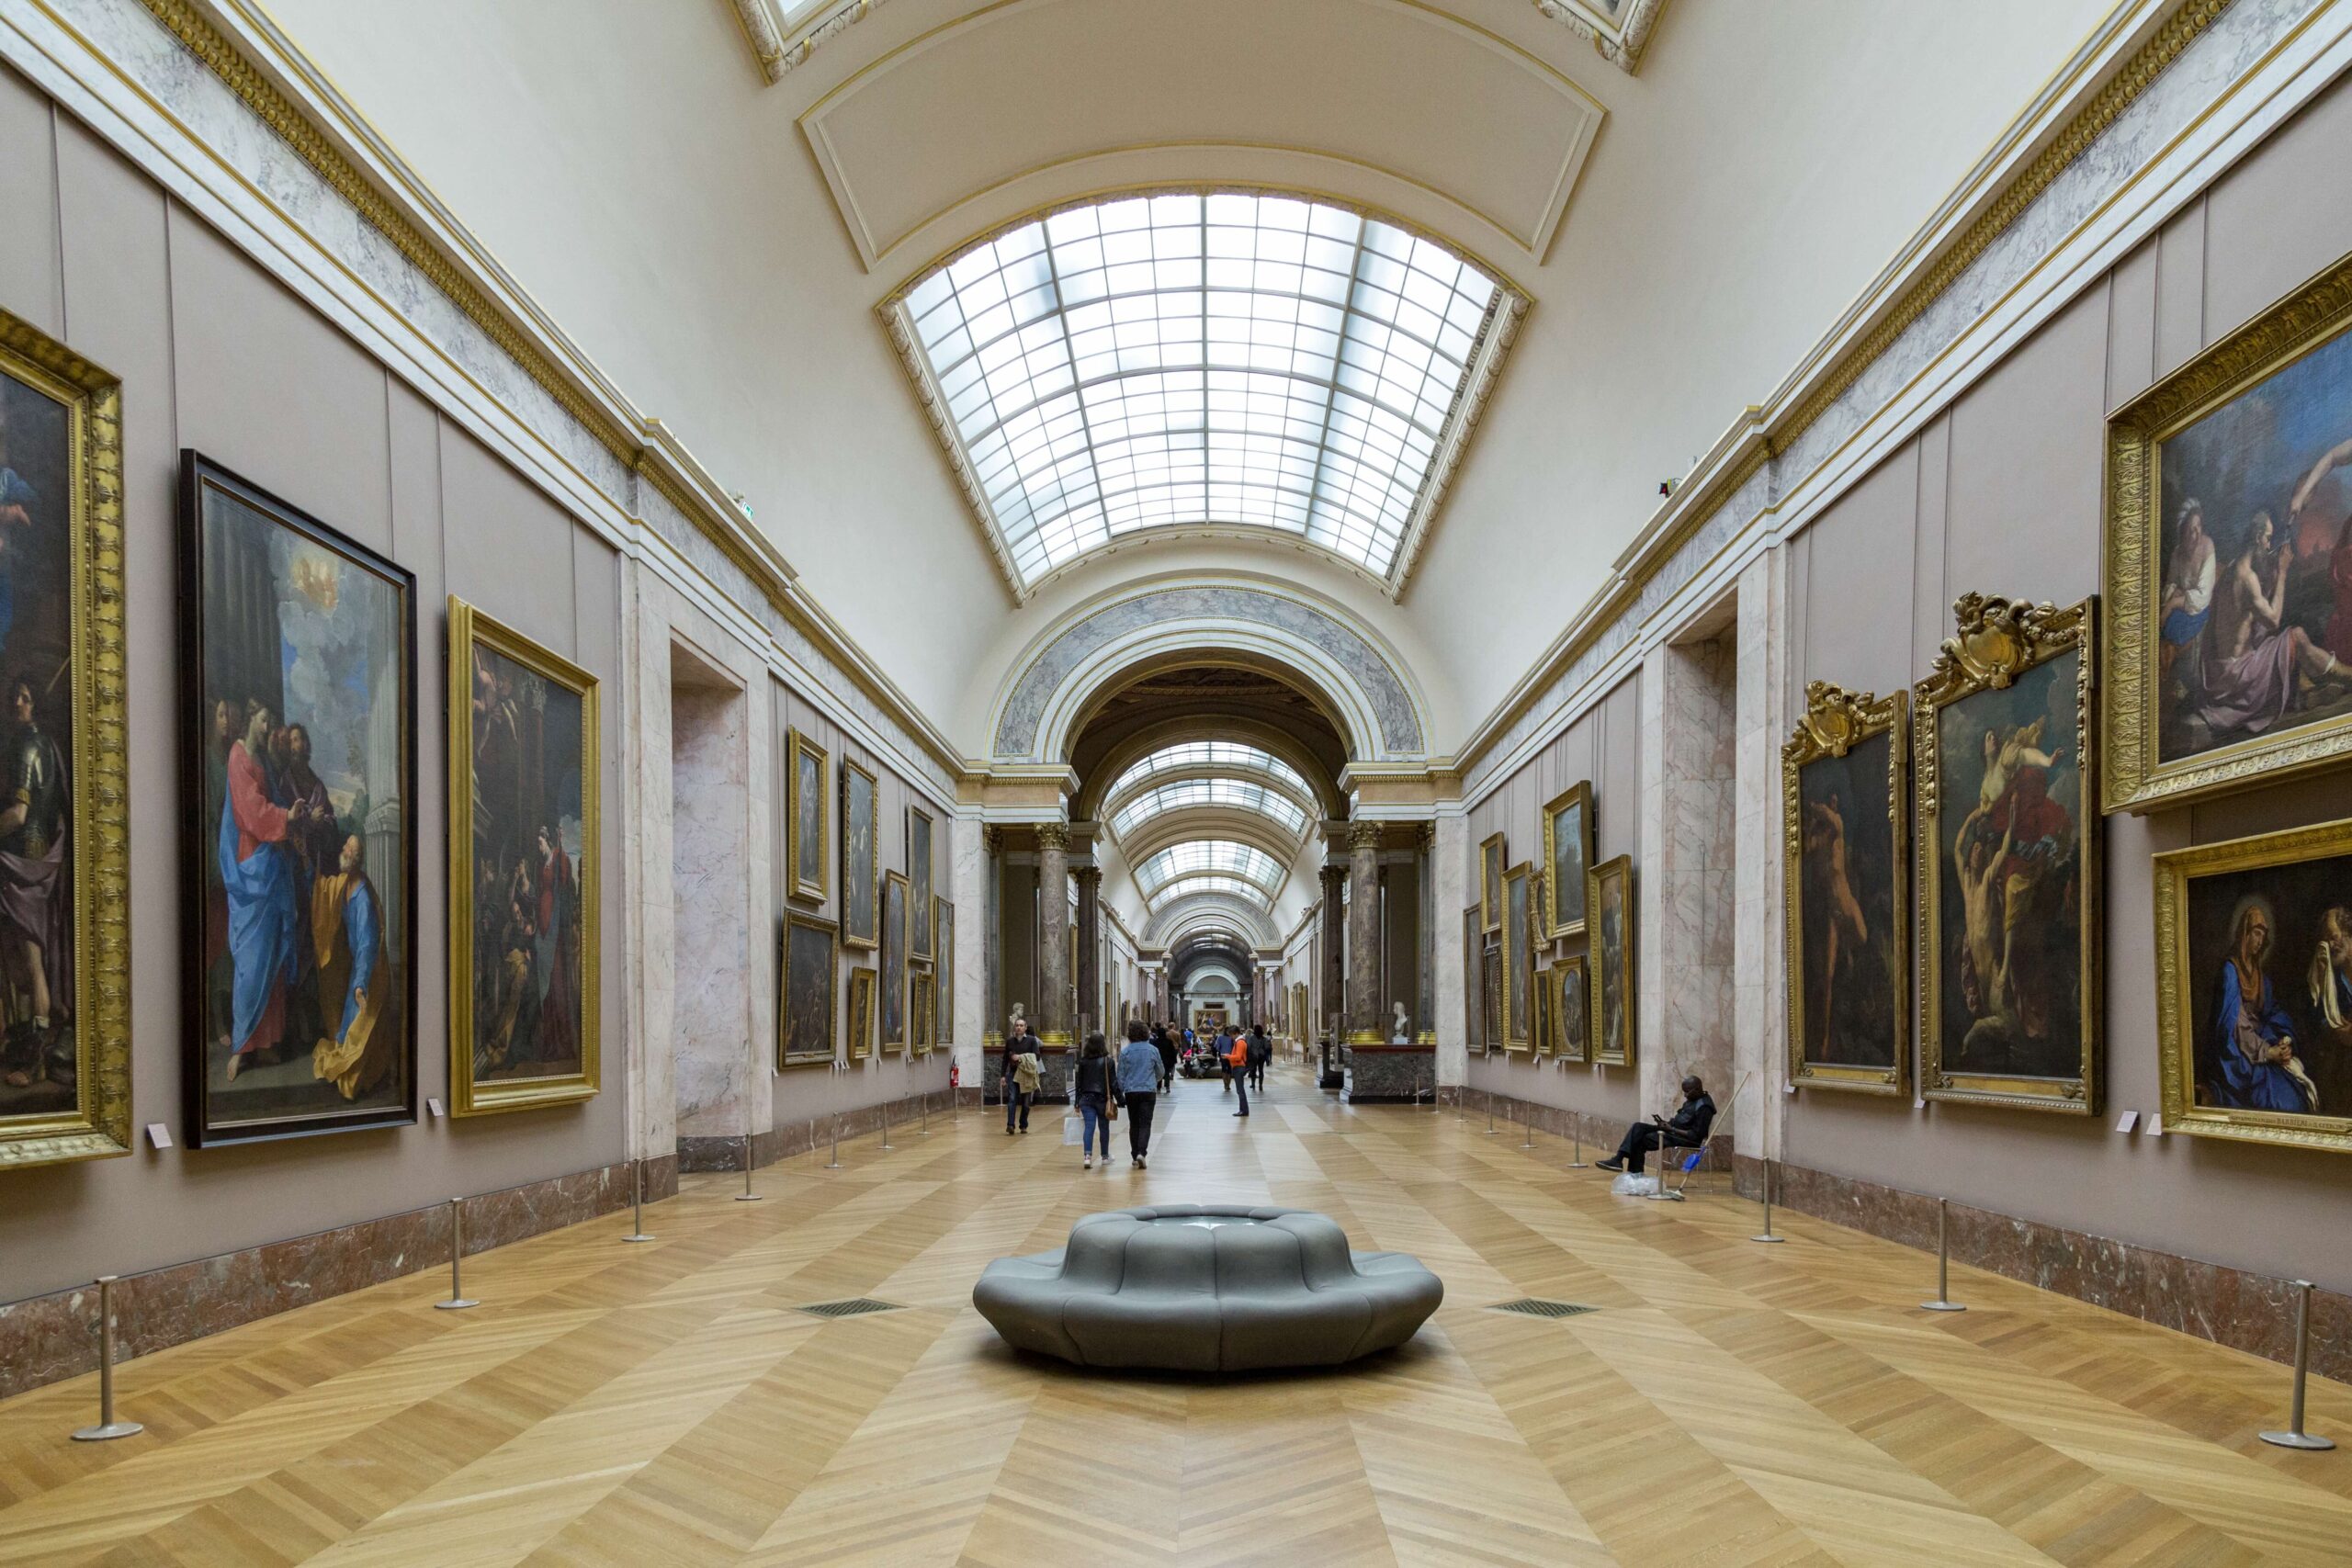 Louvre Museum Ticket Hacks: How To Save Money in Paris